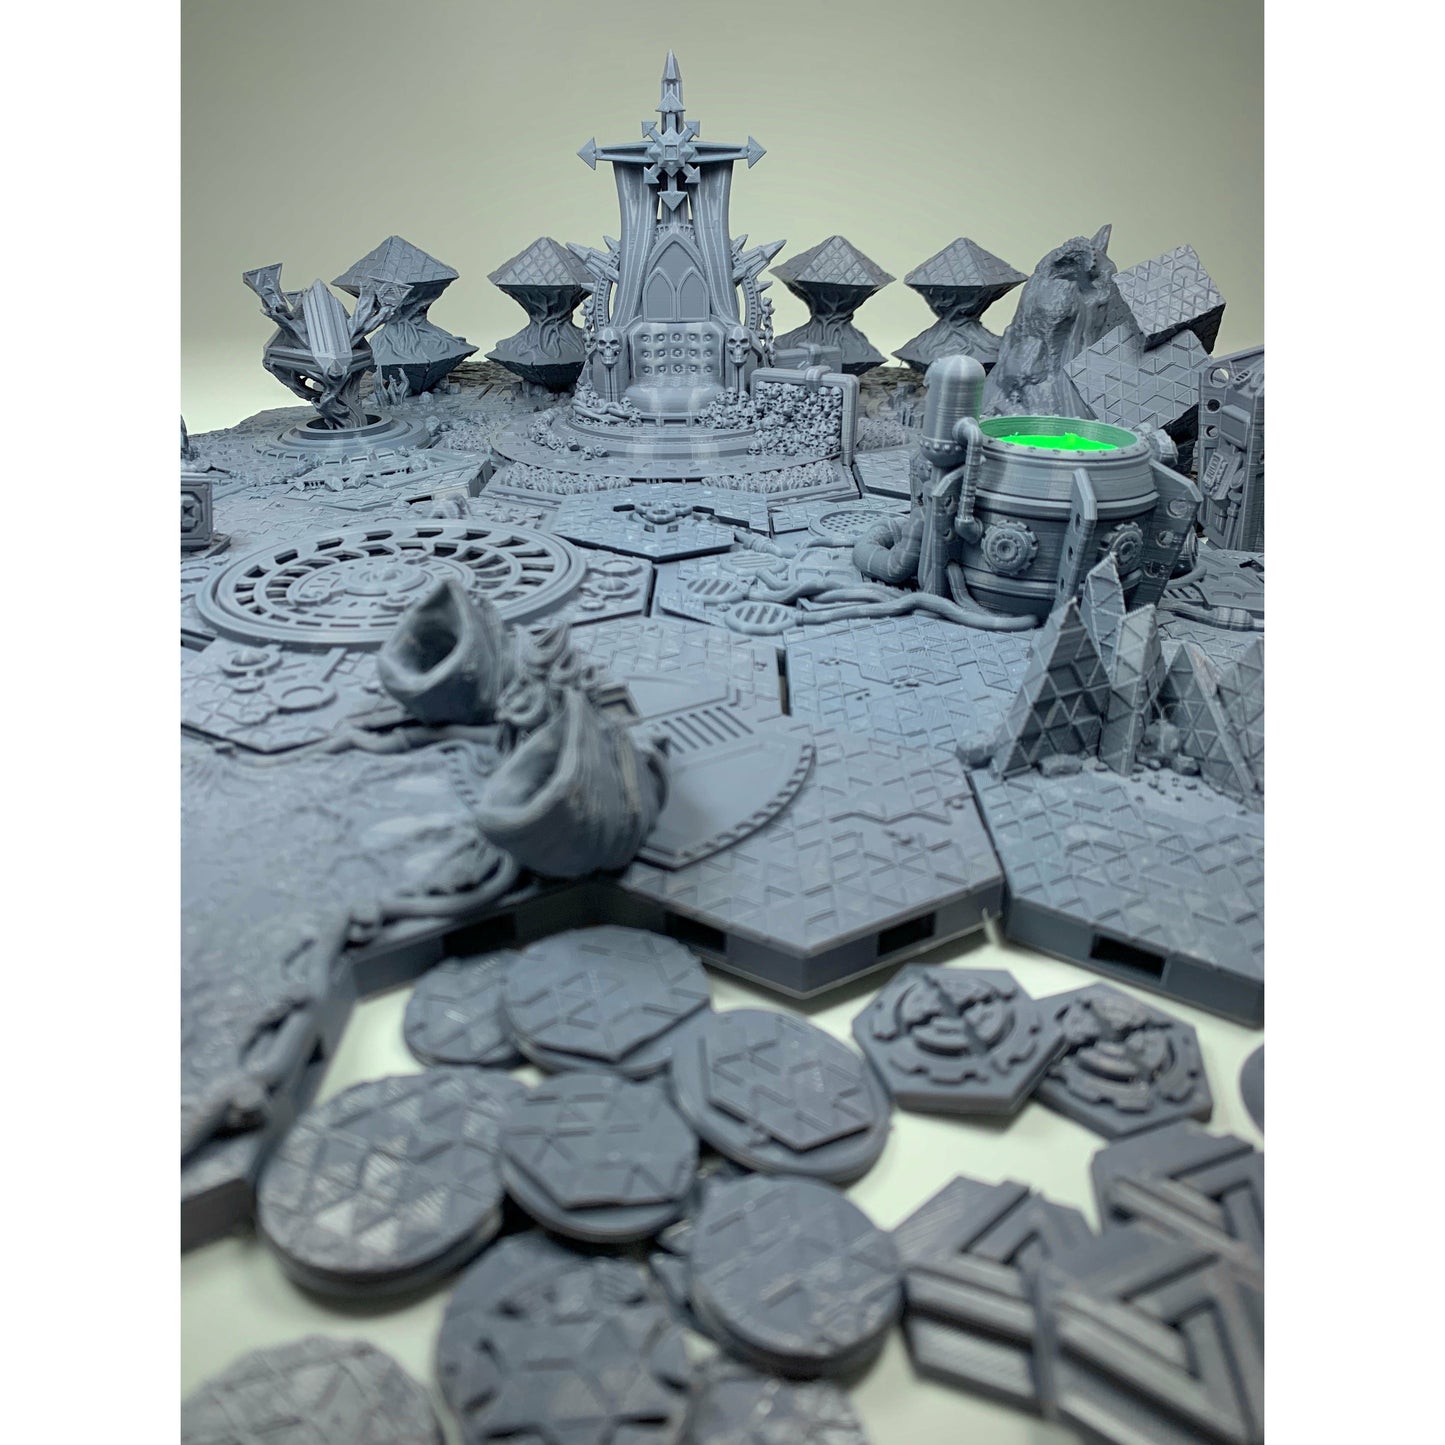 Escalation Compatible Deluxe Custom Tile and Marker Set